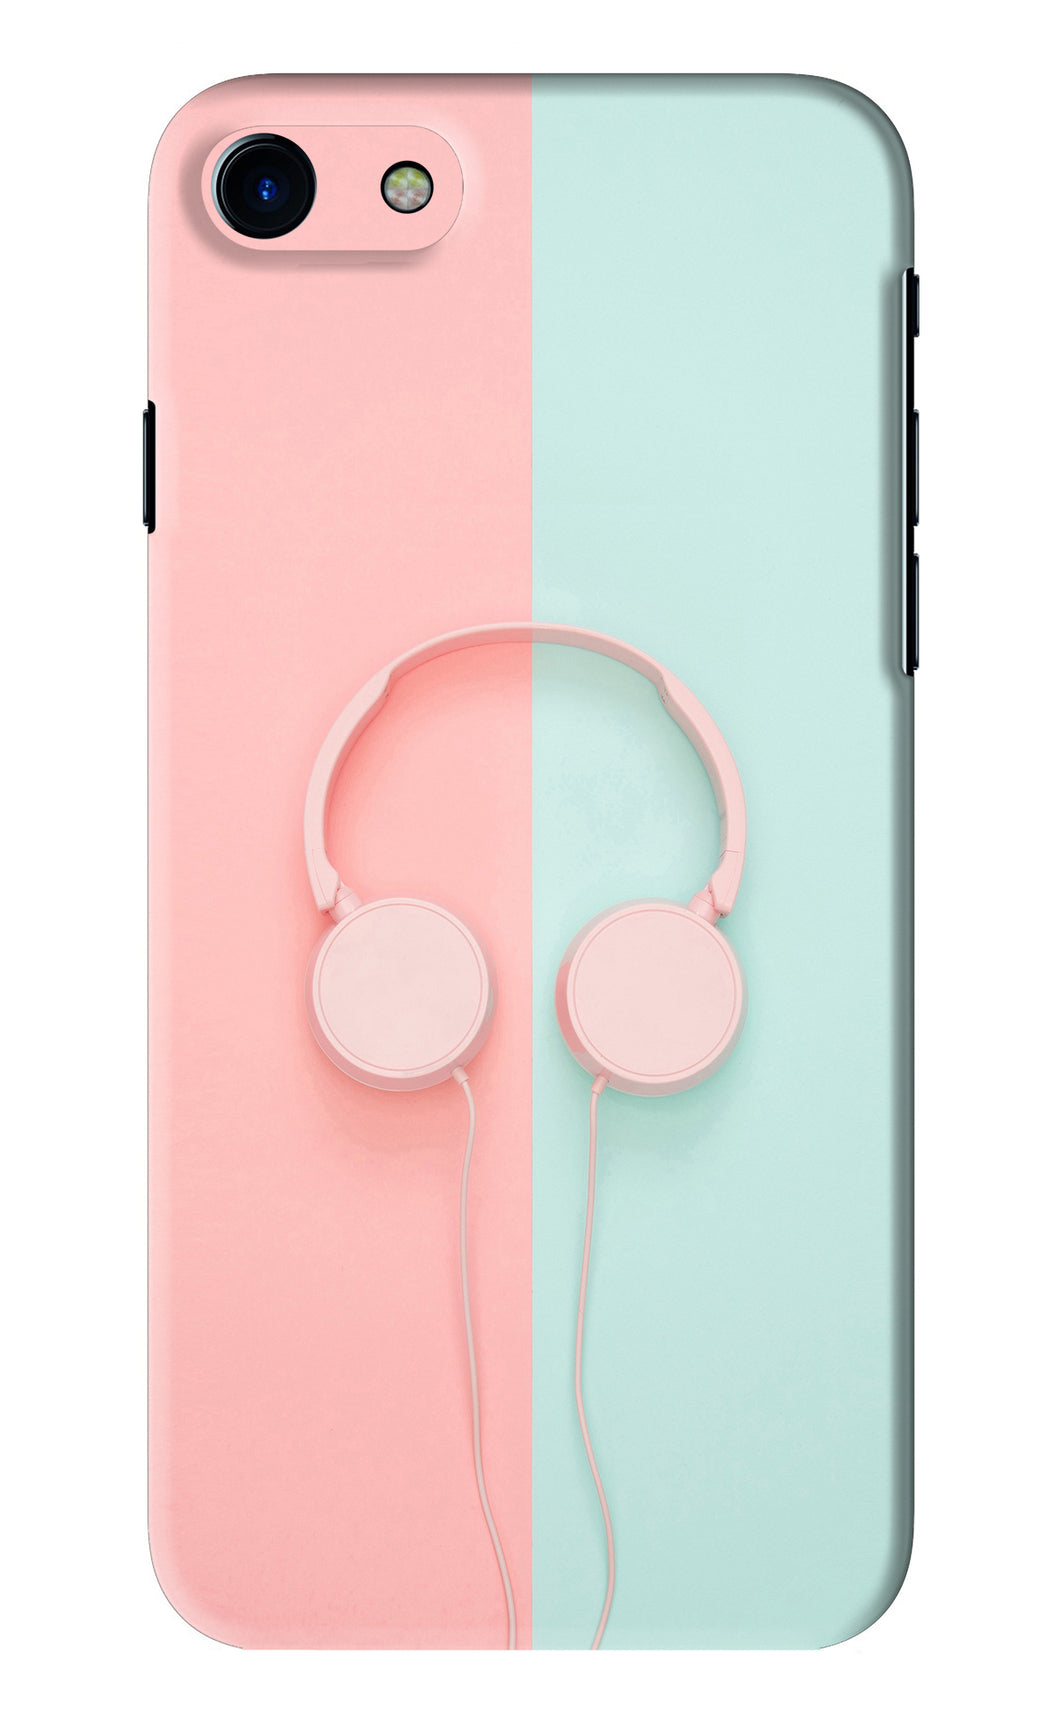 Music Lover iPhone 7 Back Skin Wrap